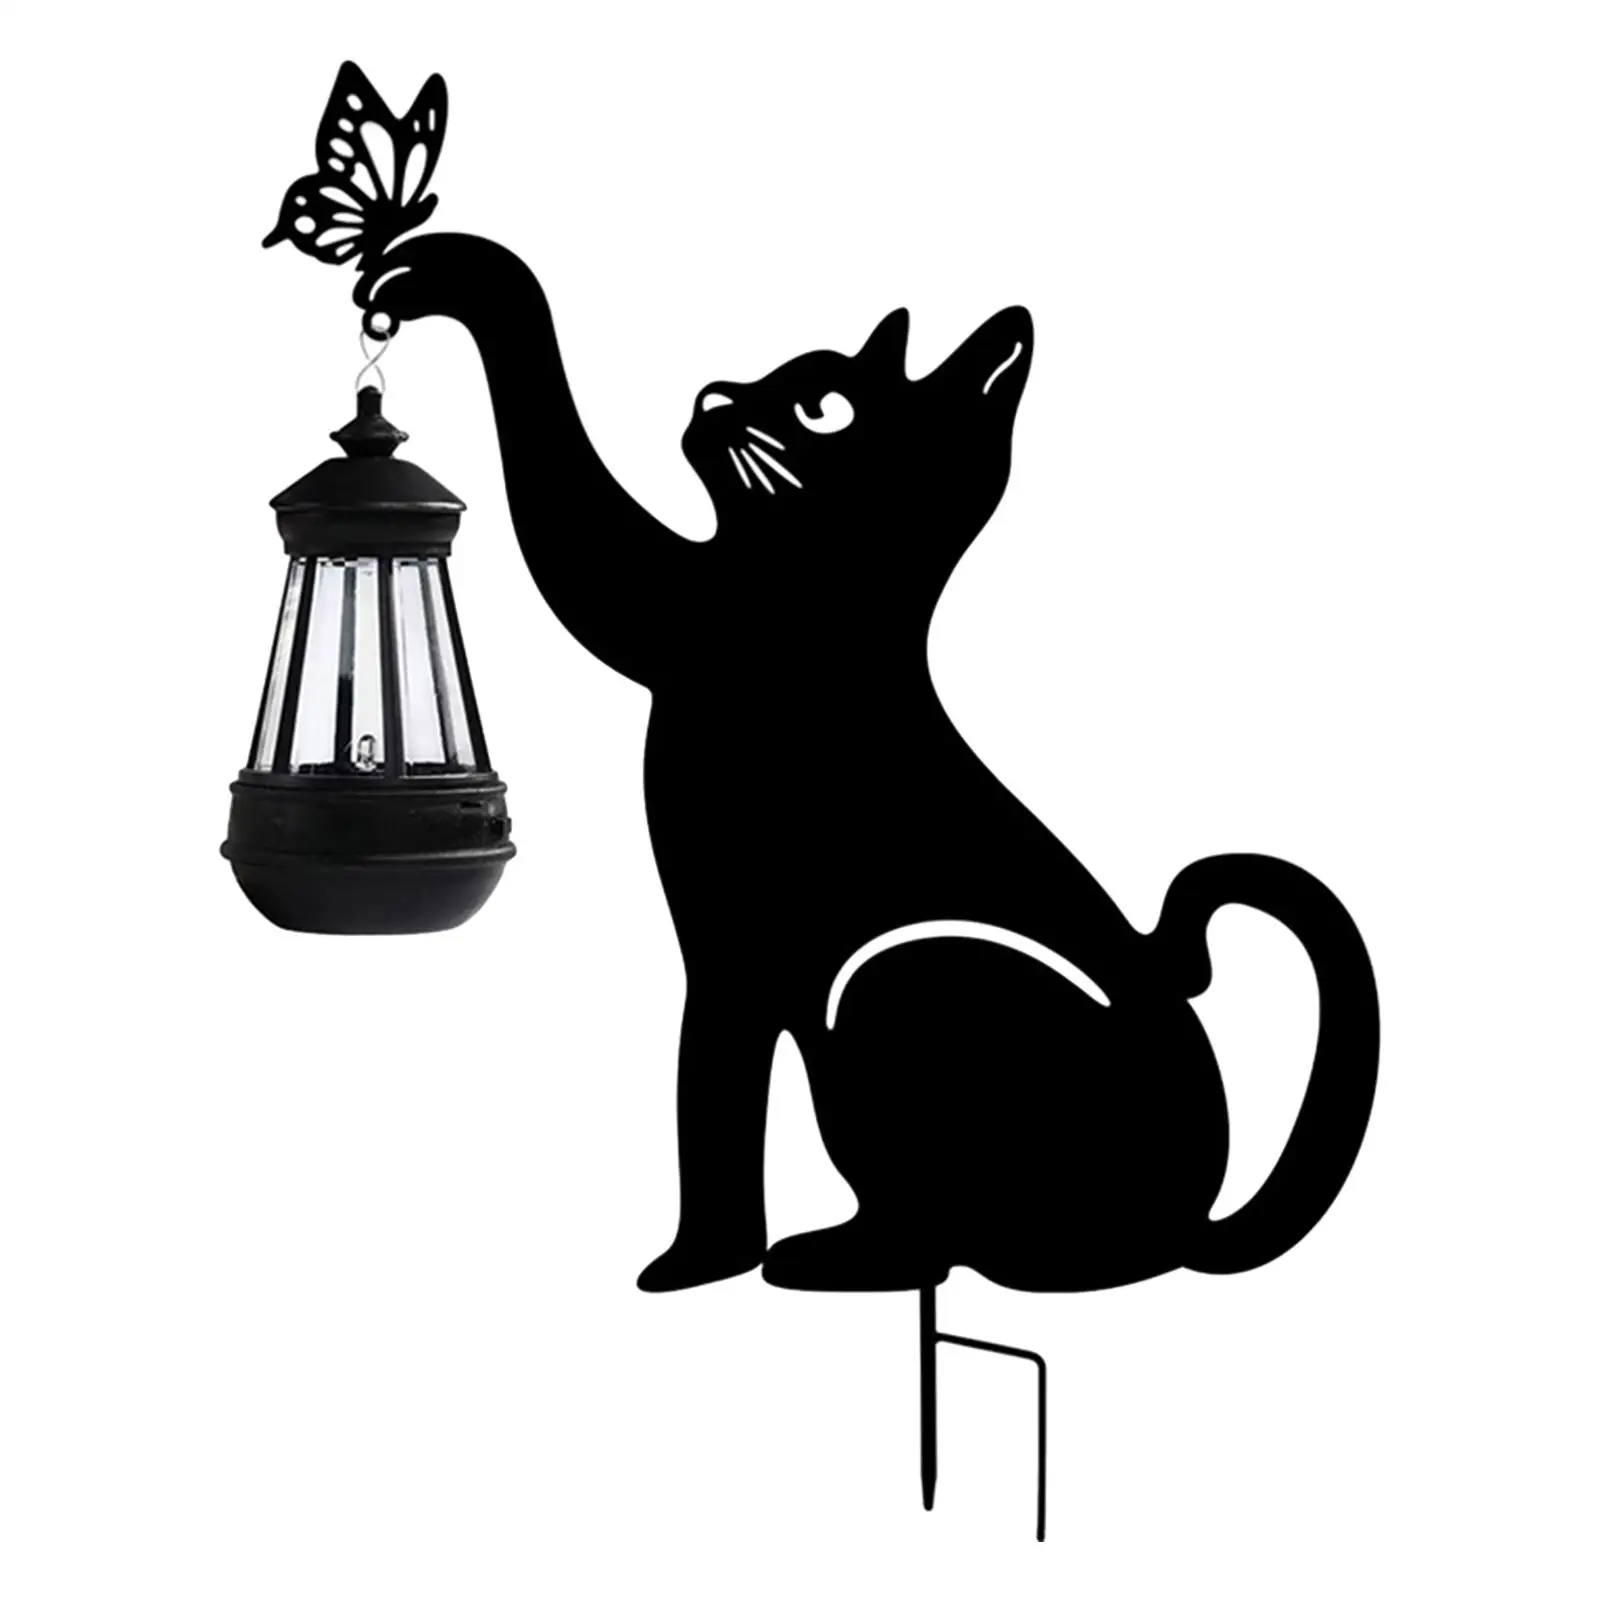 

21.6inch Hanging Solar Lantern Light with Black Cat Silhouette Versatile Sturdy Garden Stake Light for Housewarming Gifts